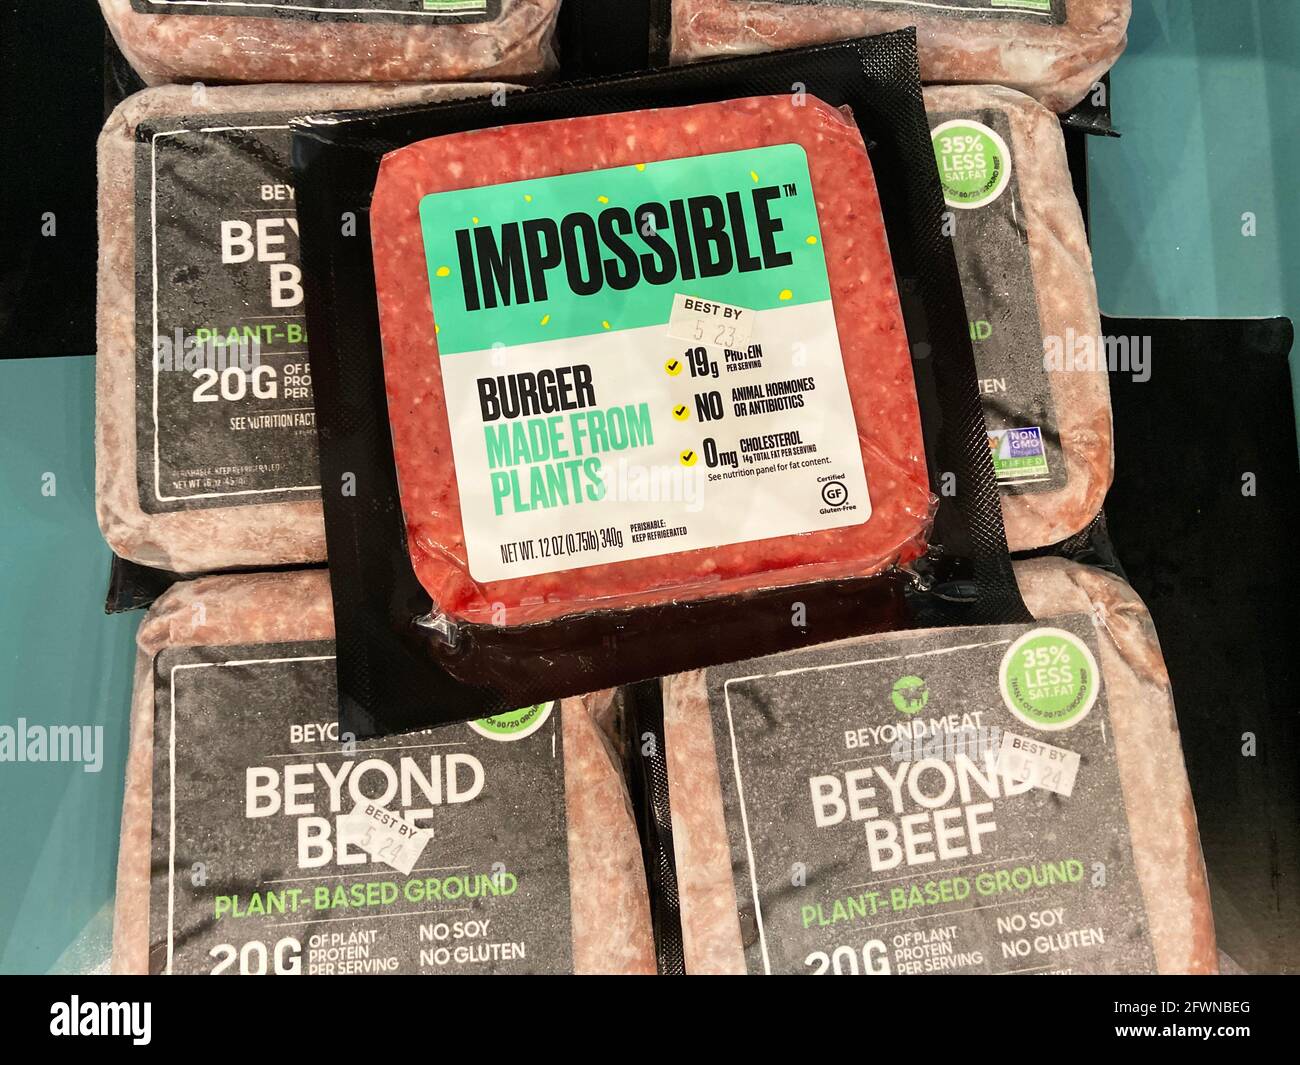 Impossible Foods Burger Made From Plants on top of Beyond Meat Beyond Beef Plant Based Ground Beef packages. - San Jose, California, USA - 2021 Stock Photo